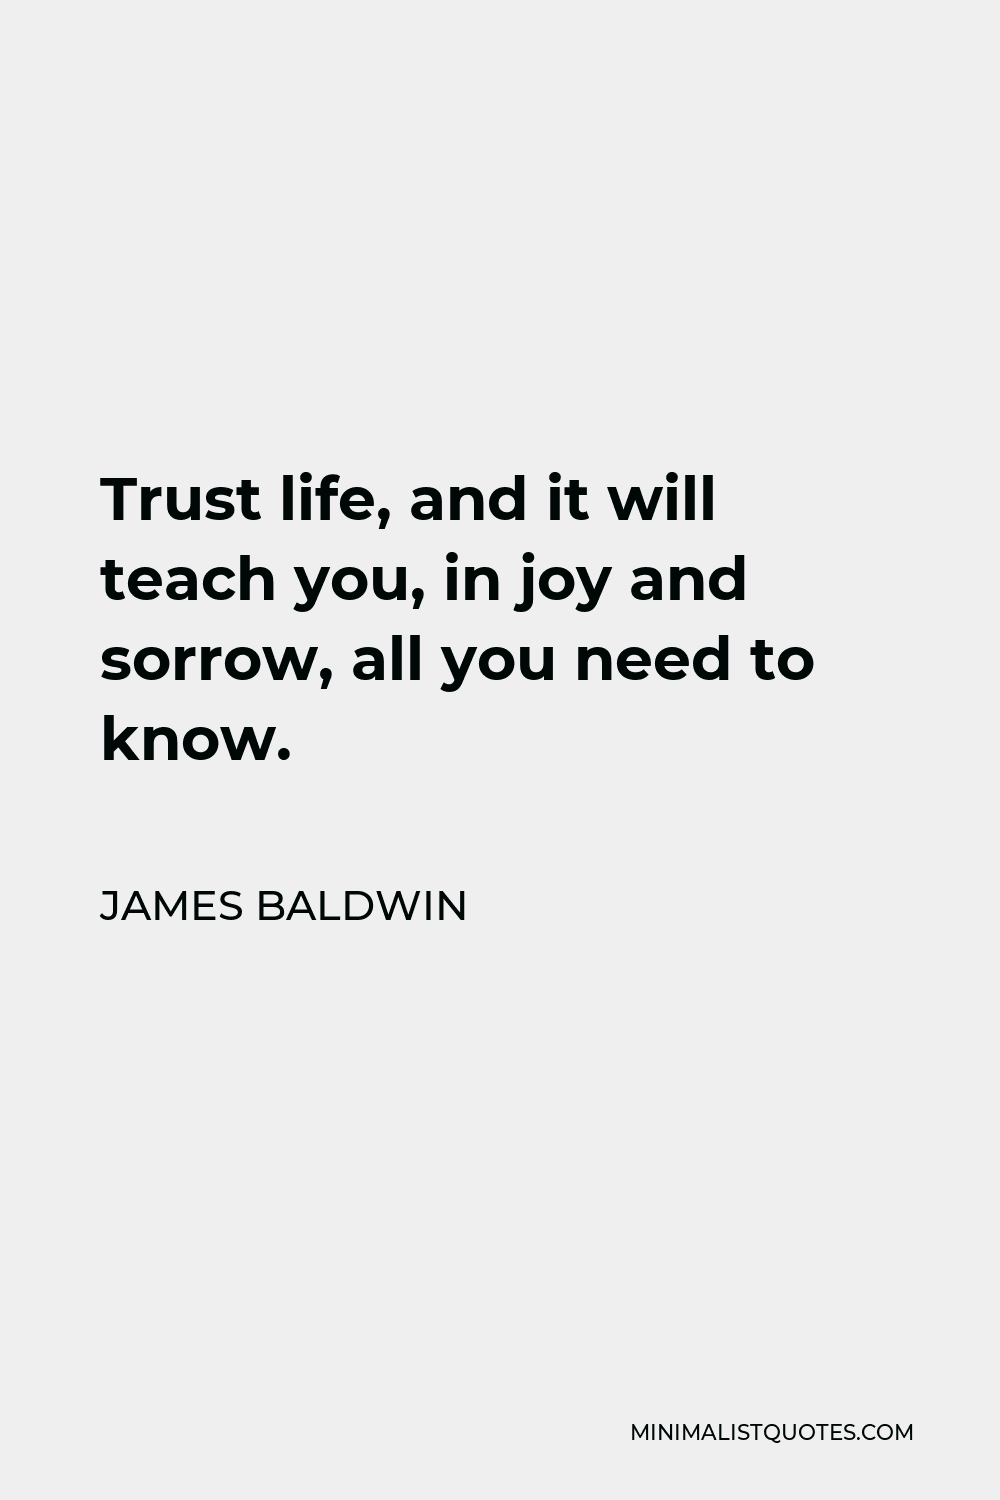 James Baldwin Quote - Trust life, and it will teach you, in joy and sorrow, all you need to know.